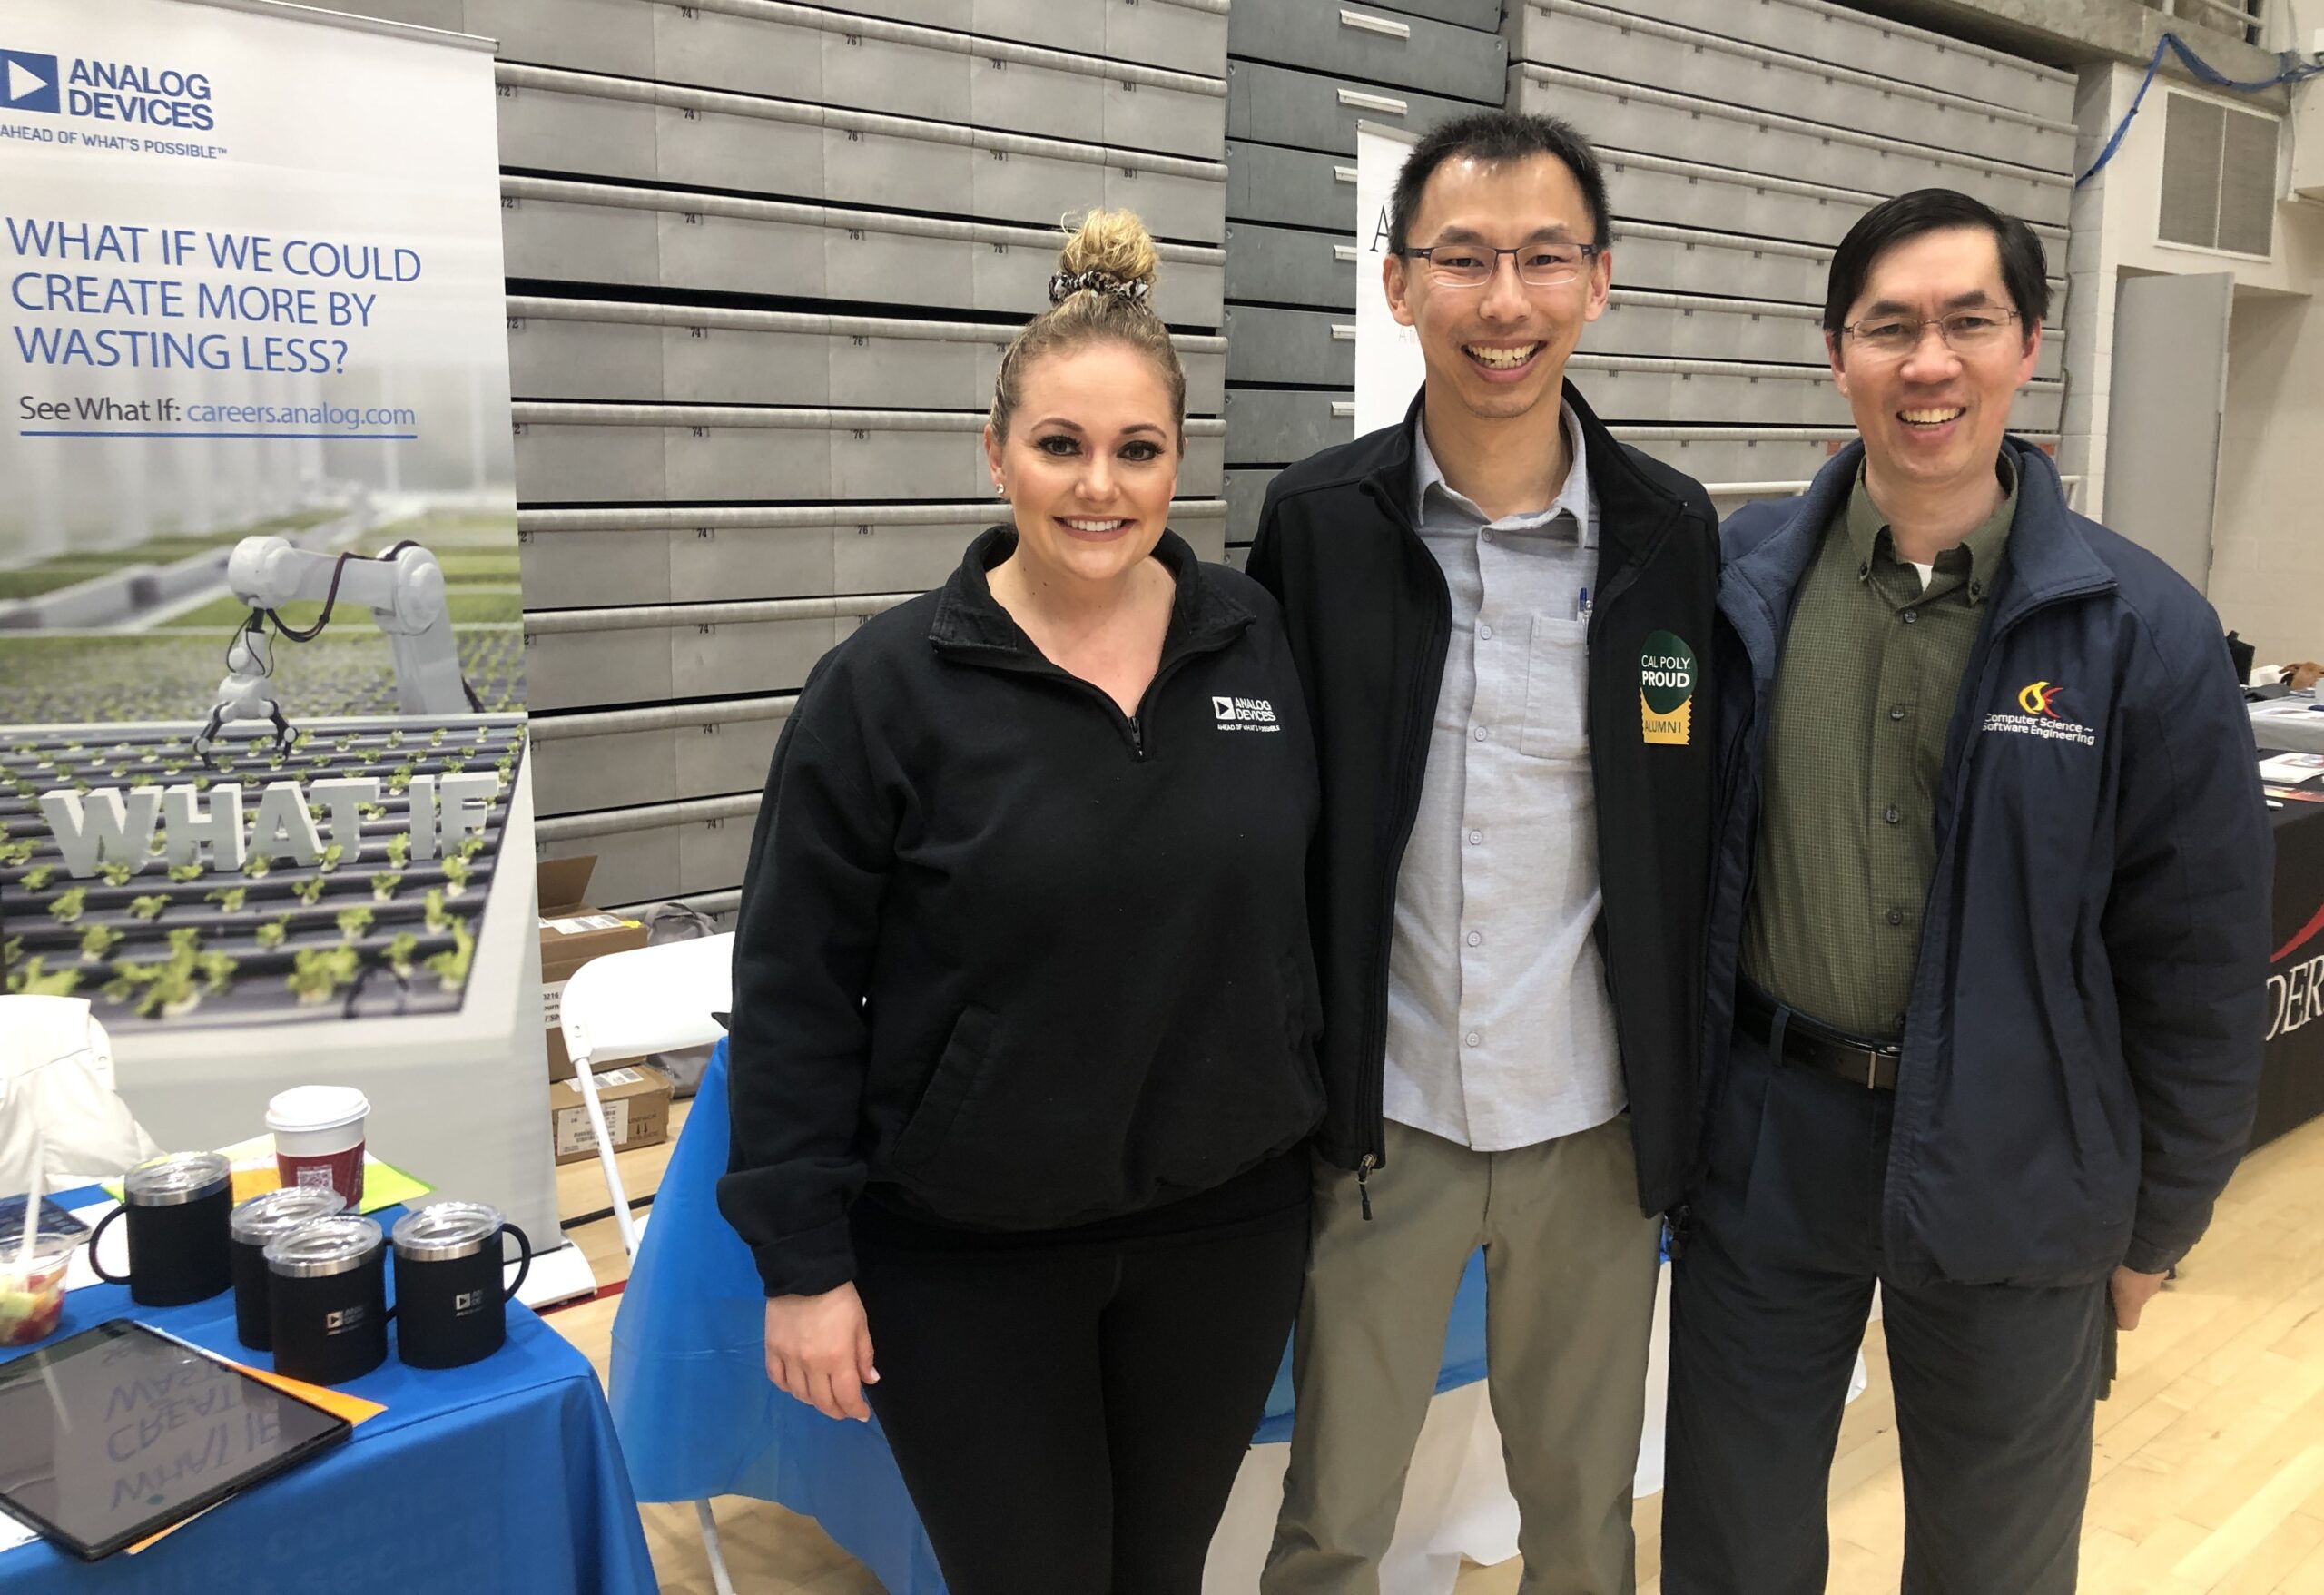 Two representatives from Analog Devices join Professor John Seng during a career fair on campus